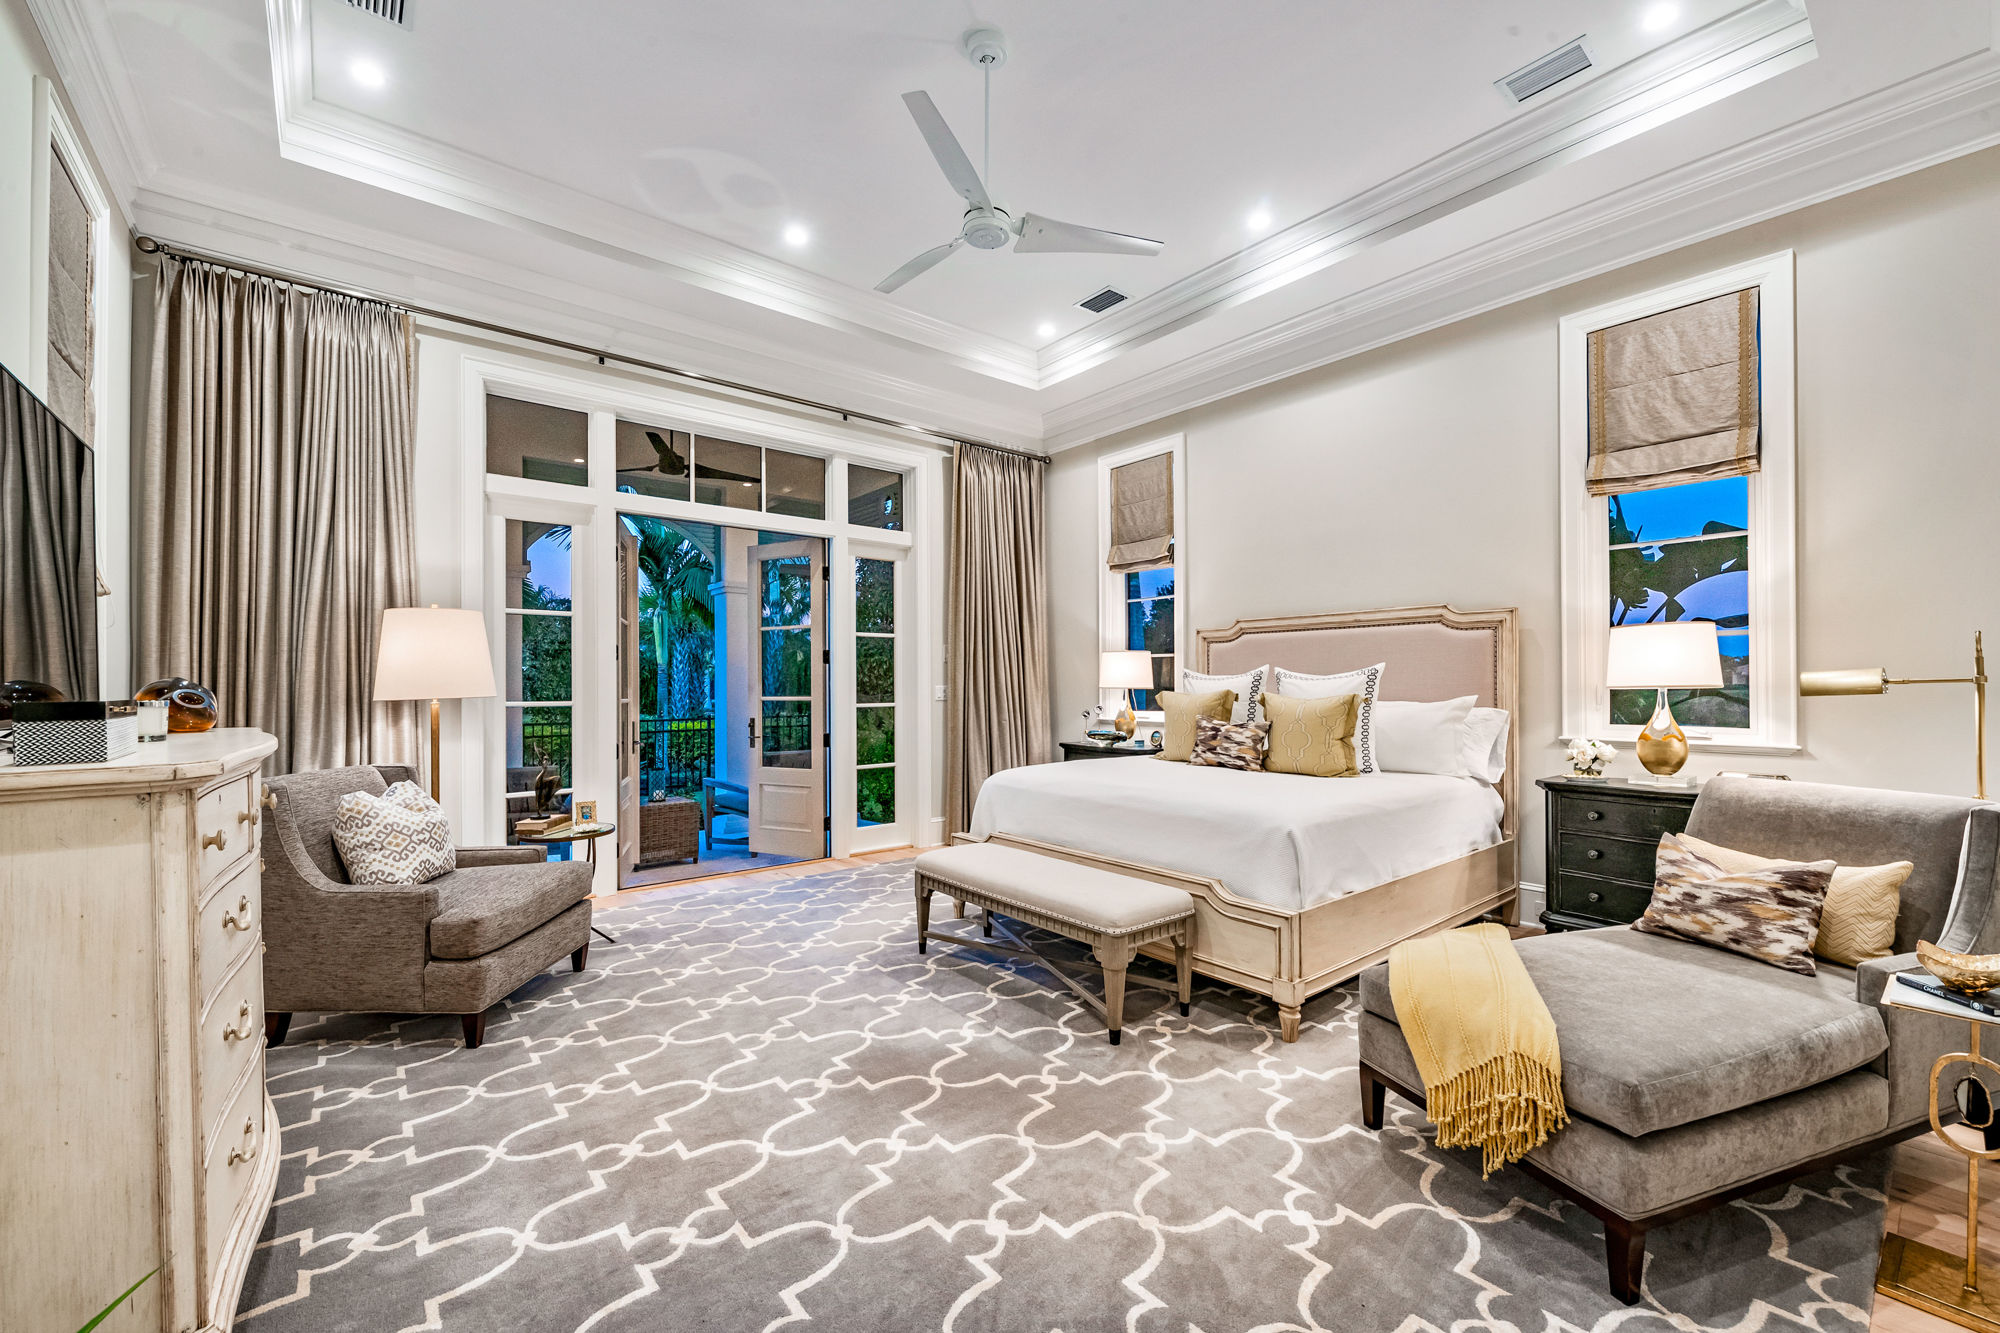 The master bedroom is subdued and elegant. Decorator Holly Dennis worked with the owners to create an atmosphere that merges traditional and contemporary design.